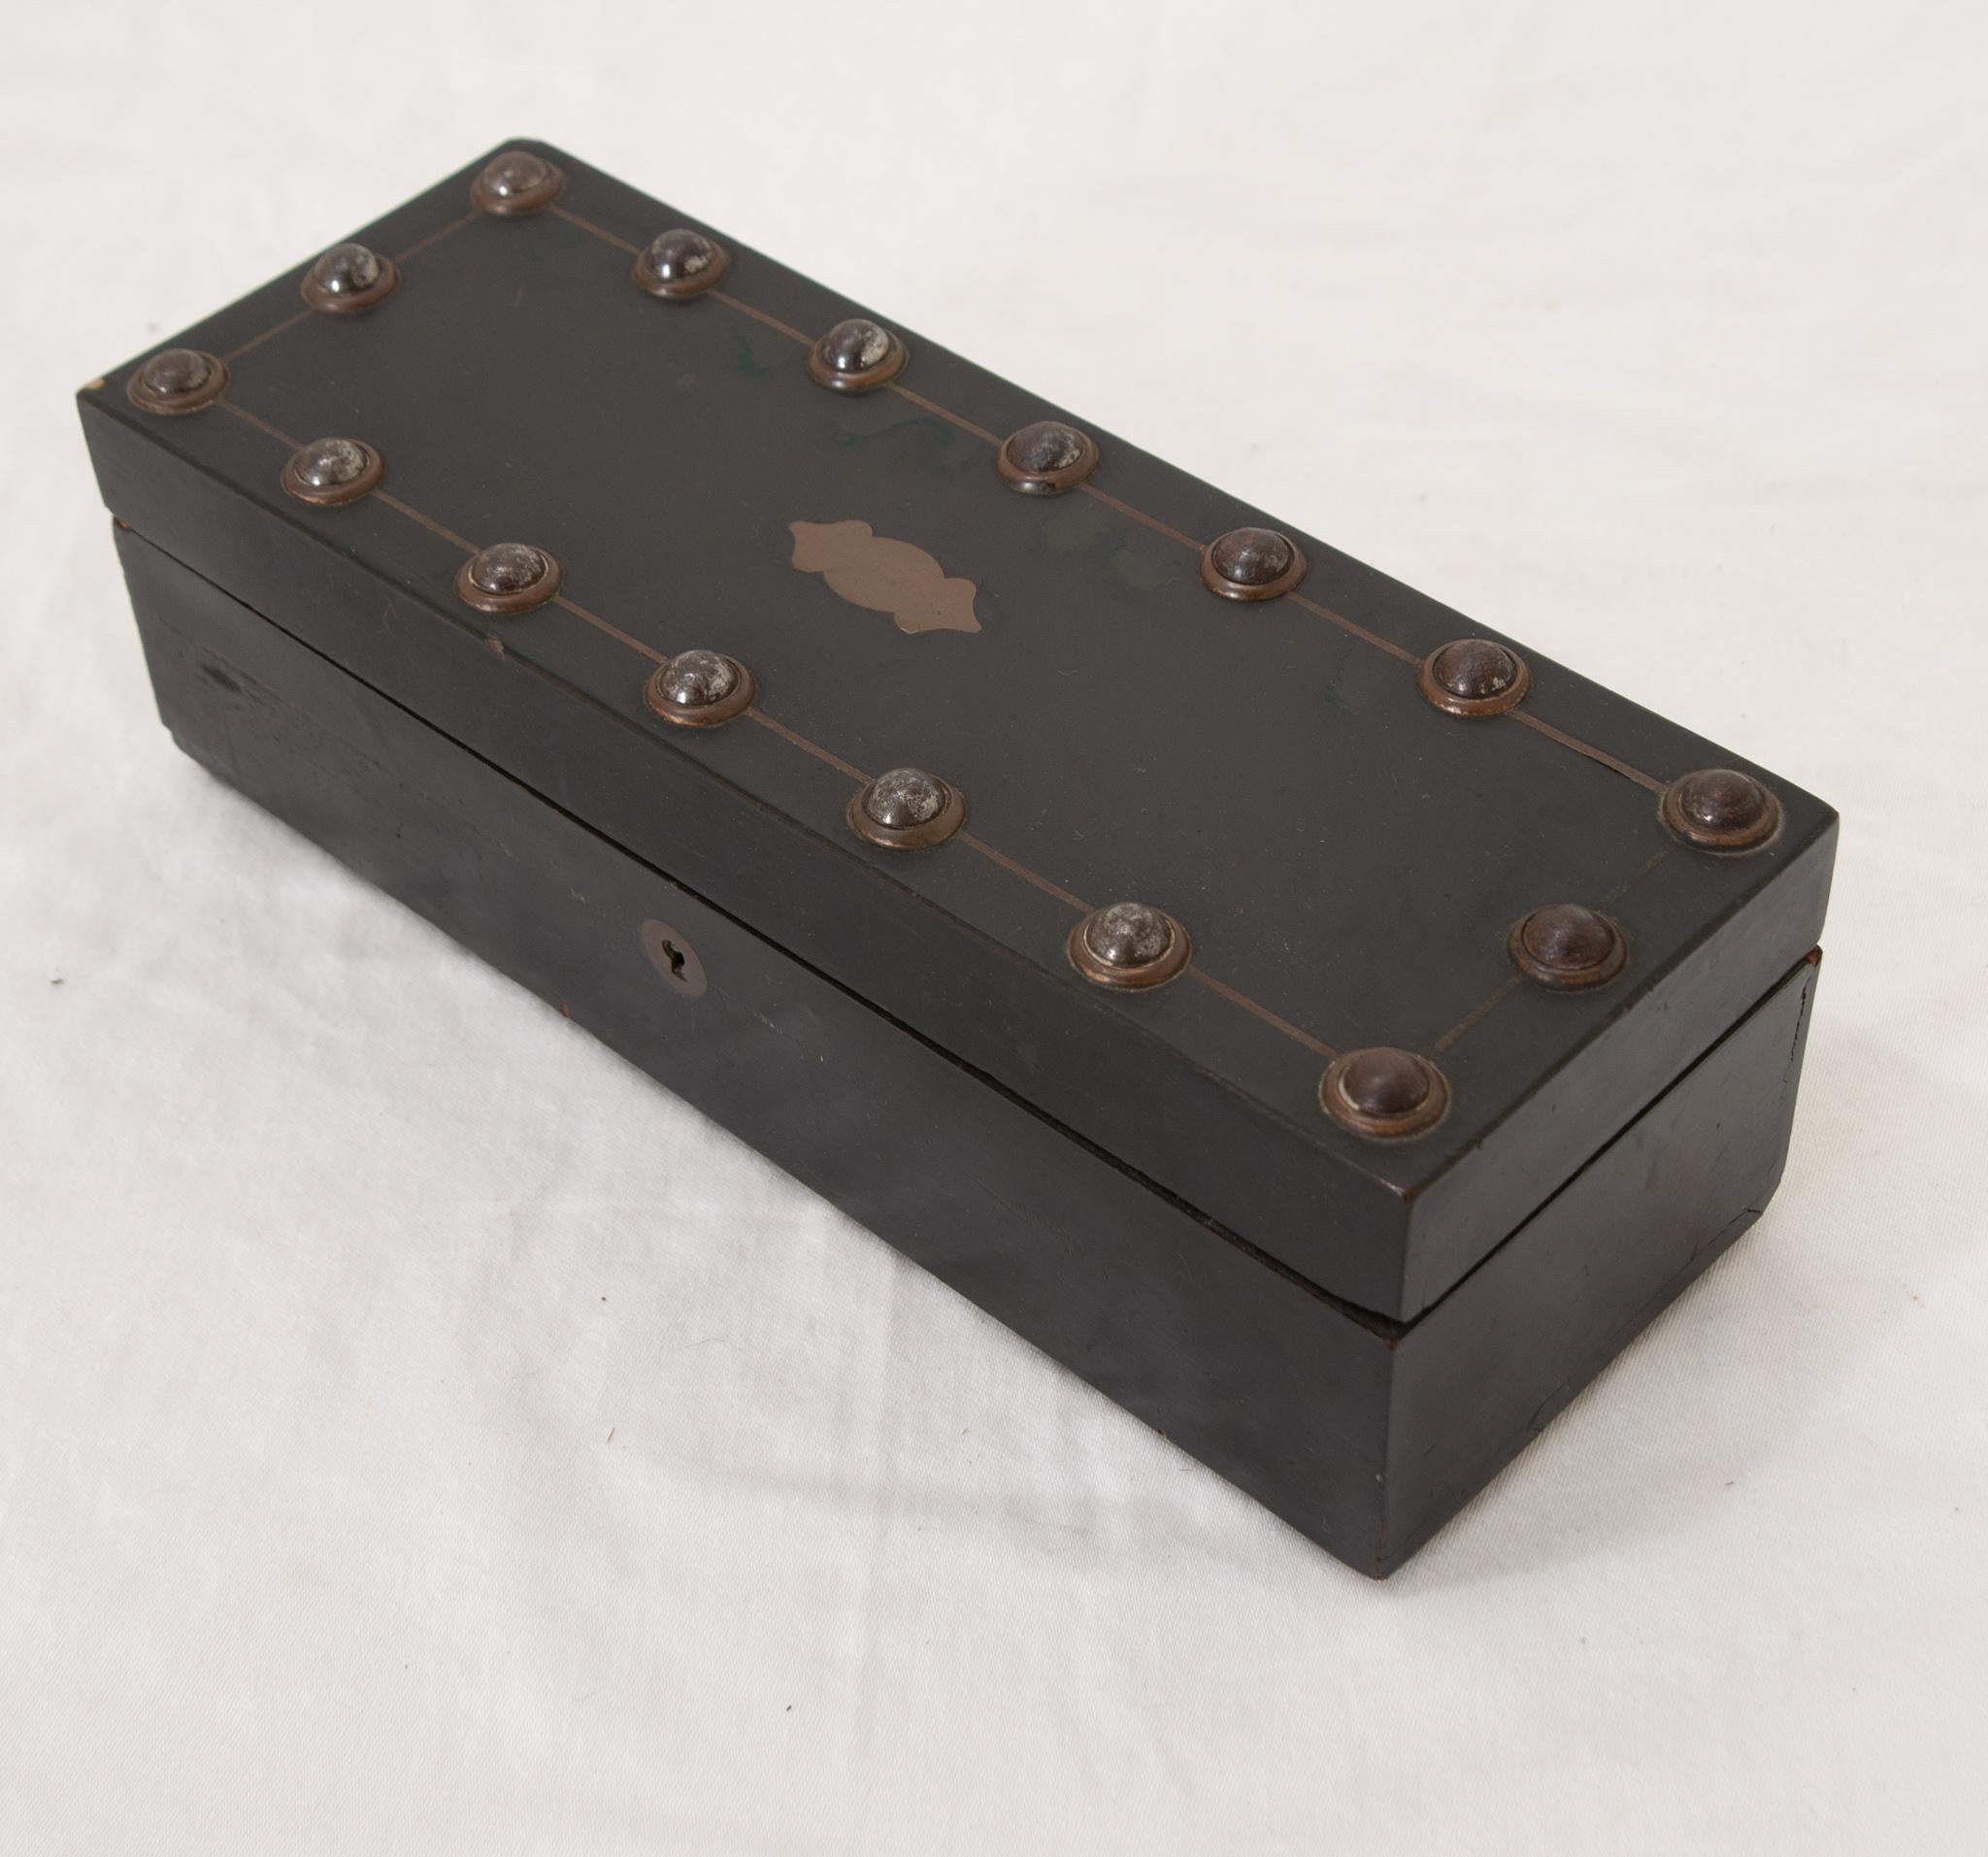 A French 19th Century glove box opening on brass hinges to reveal its original fabric lined storage compartments. This handsome box features ebonized wood on its exterior, as well as a large nailhead design and a brass top cartouche. There are clear